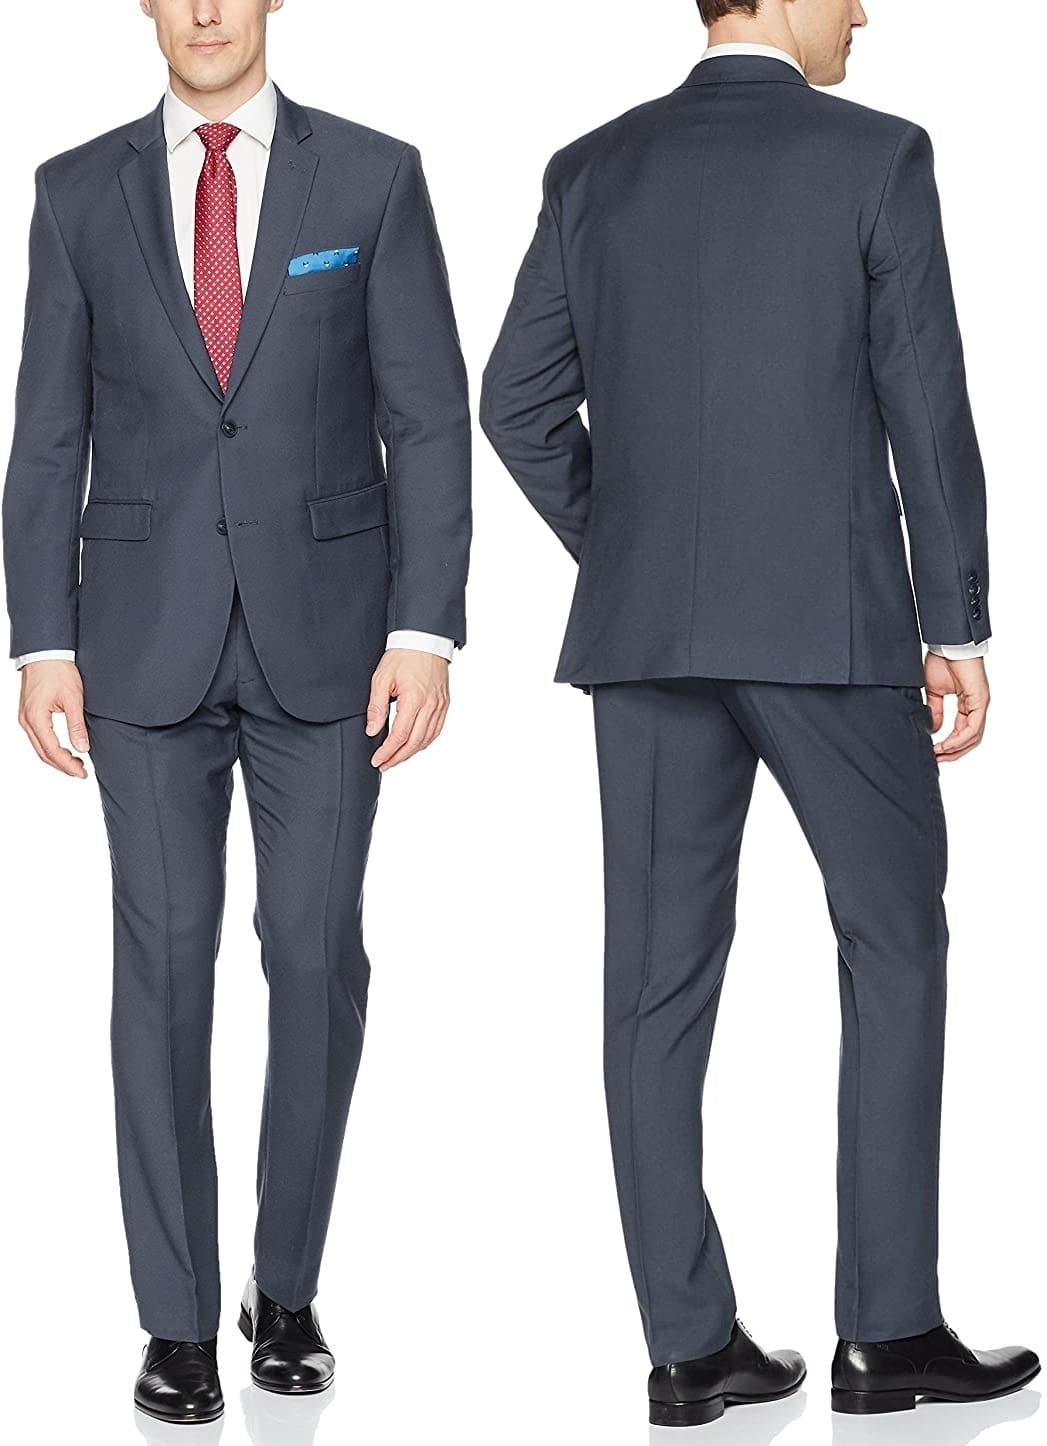 Wearing a neat, tailored black suit like the Perry Ellis suit set is a general rule for men